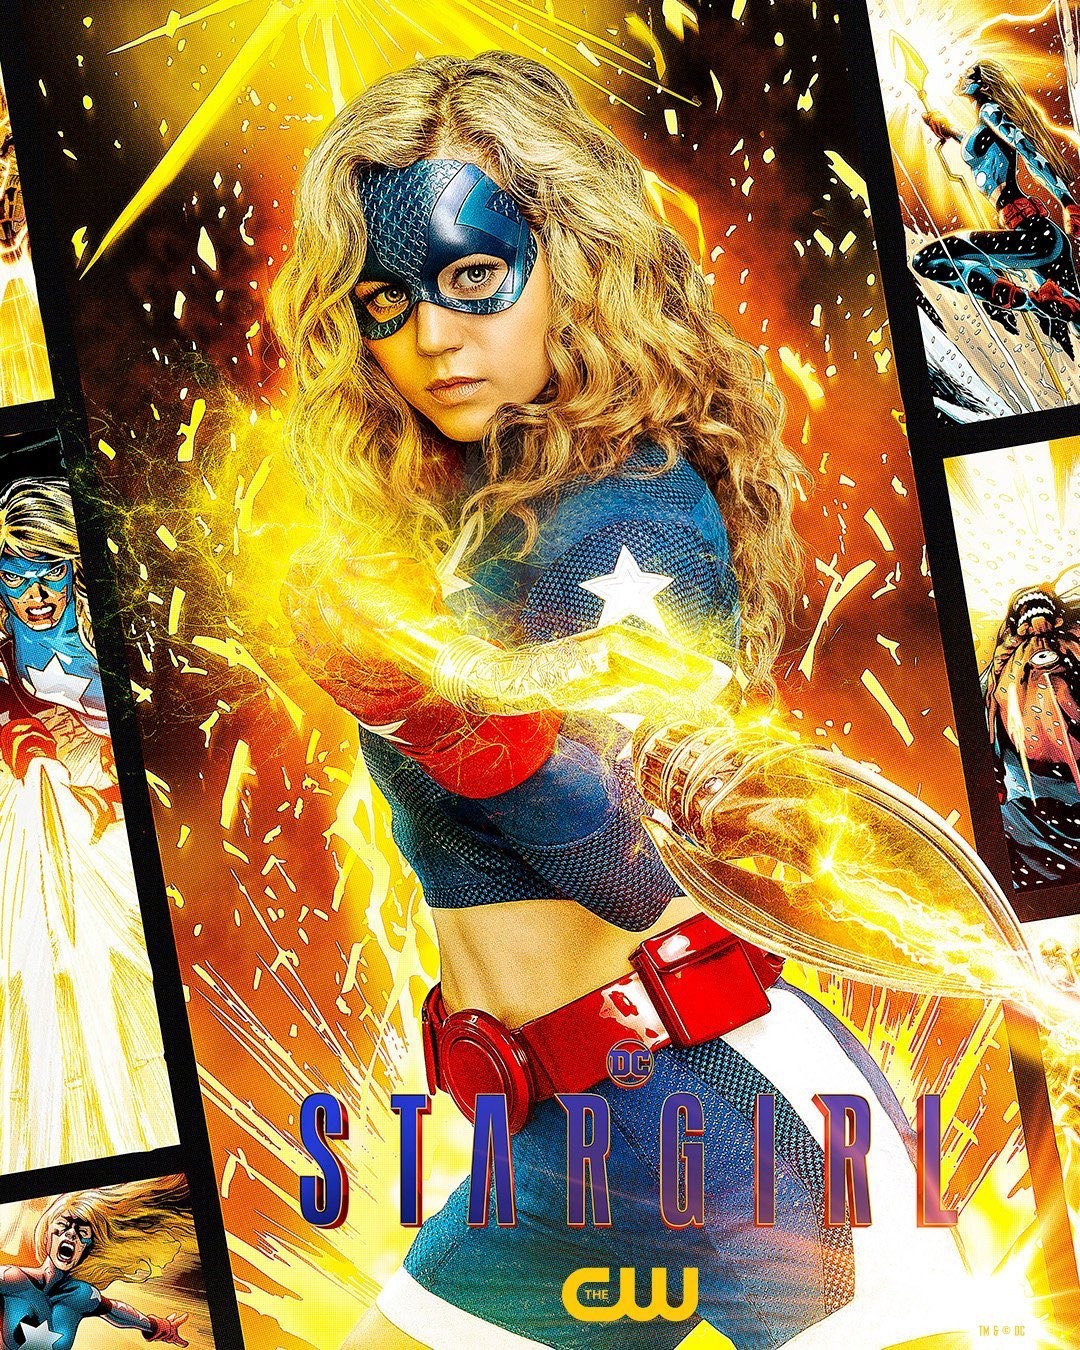 Extra Large Movie Poster Image for Stargirl (#17 of 23)